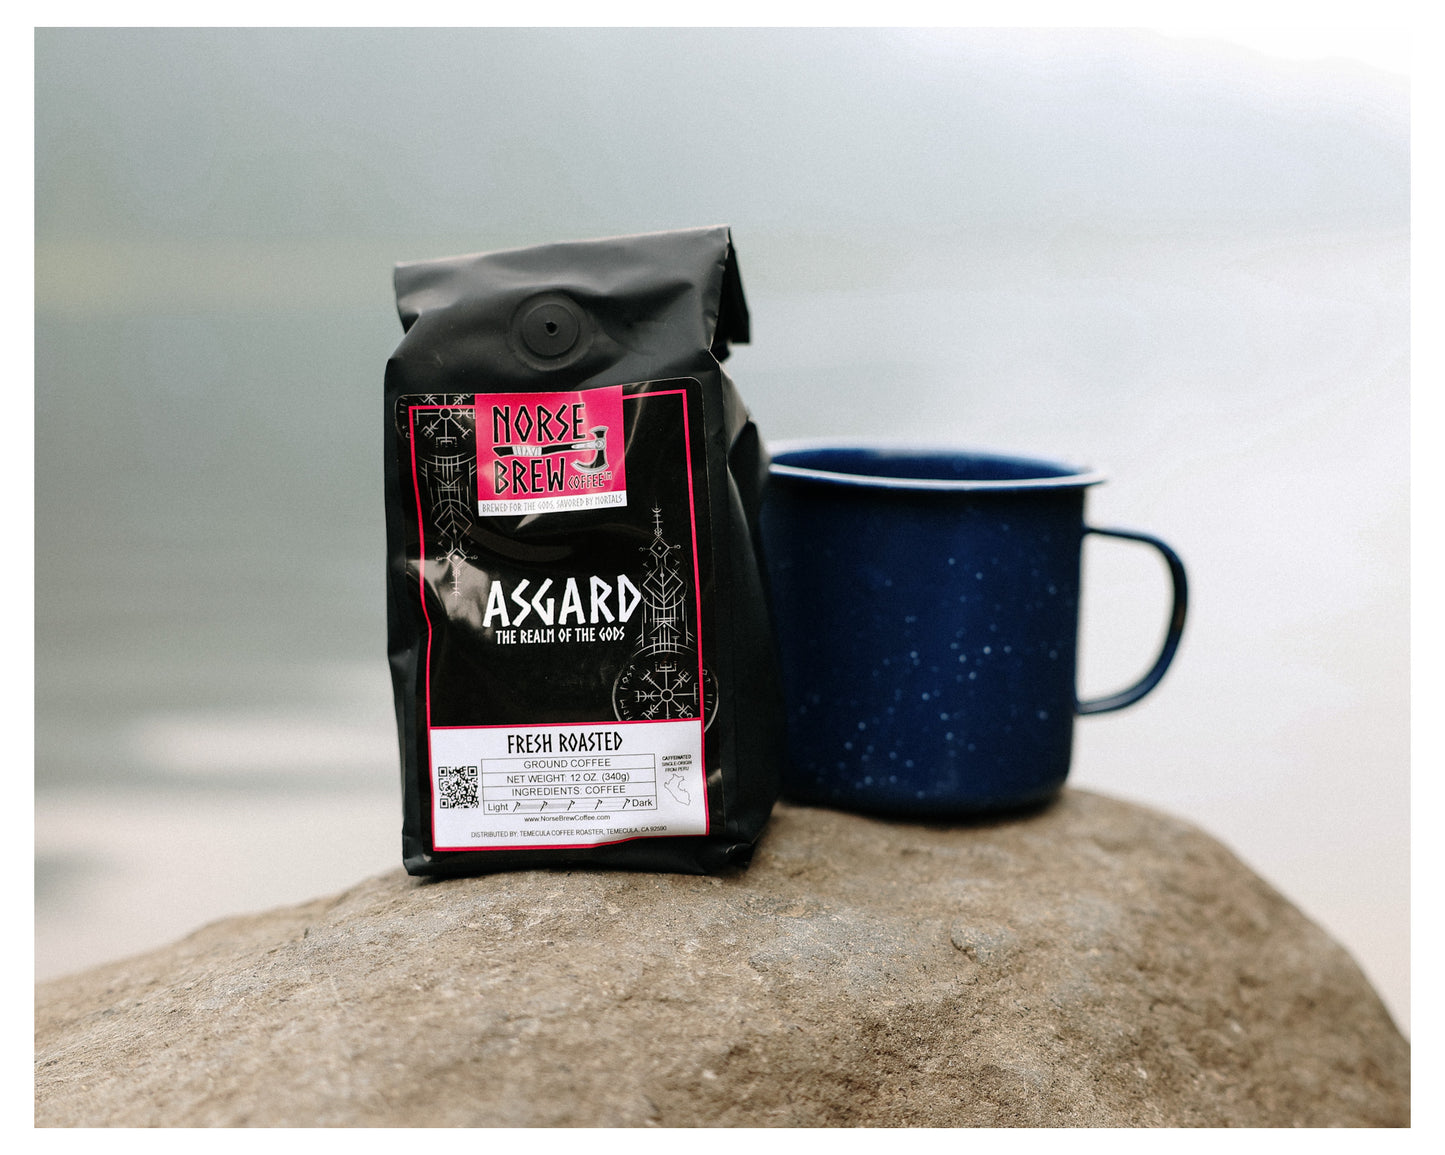 Bag of Asgard Medium Roast Whole Bean Coffee Sourced from Piura, Peru on a rock next to a coffee cup